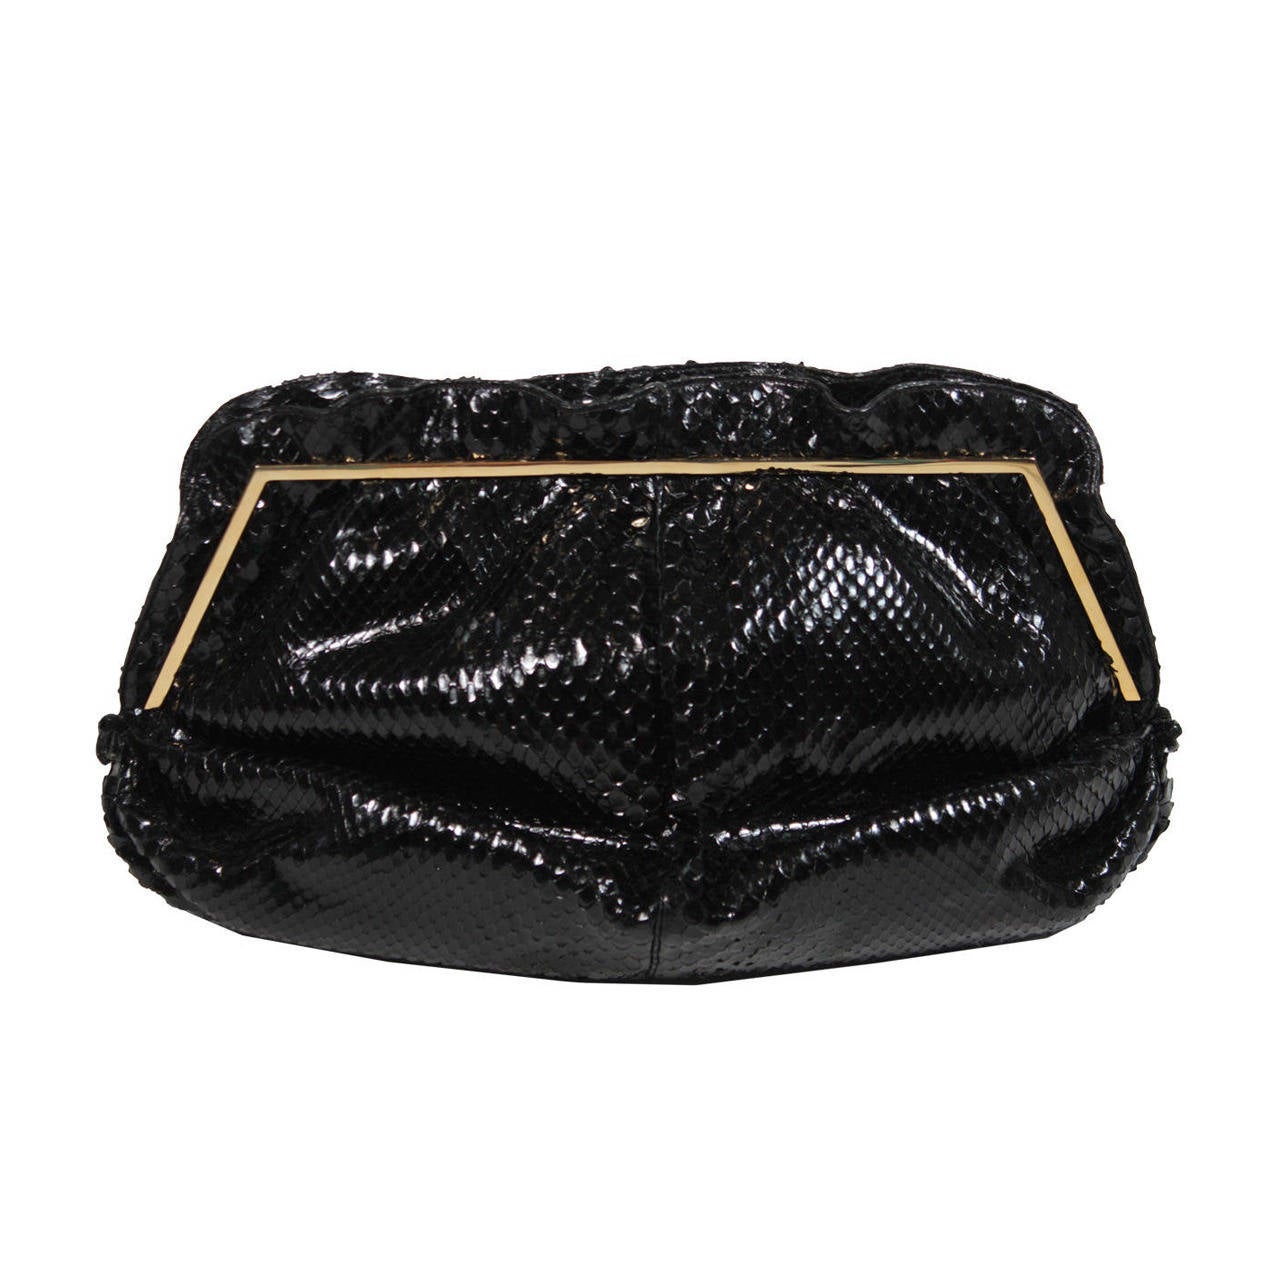 Judith Leiber Black Gathered Snakeskin Clutch with Gold Hardware